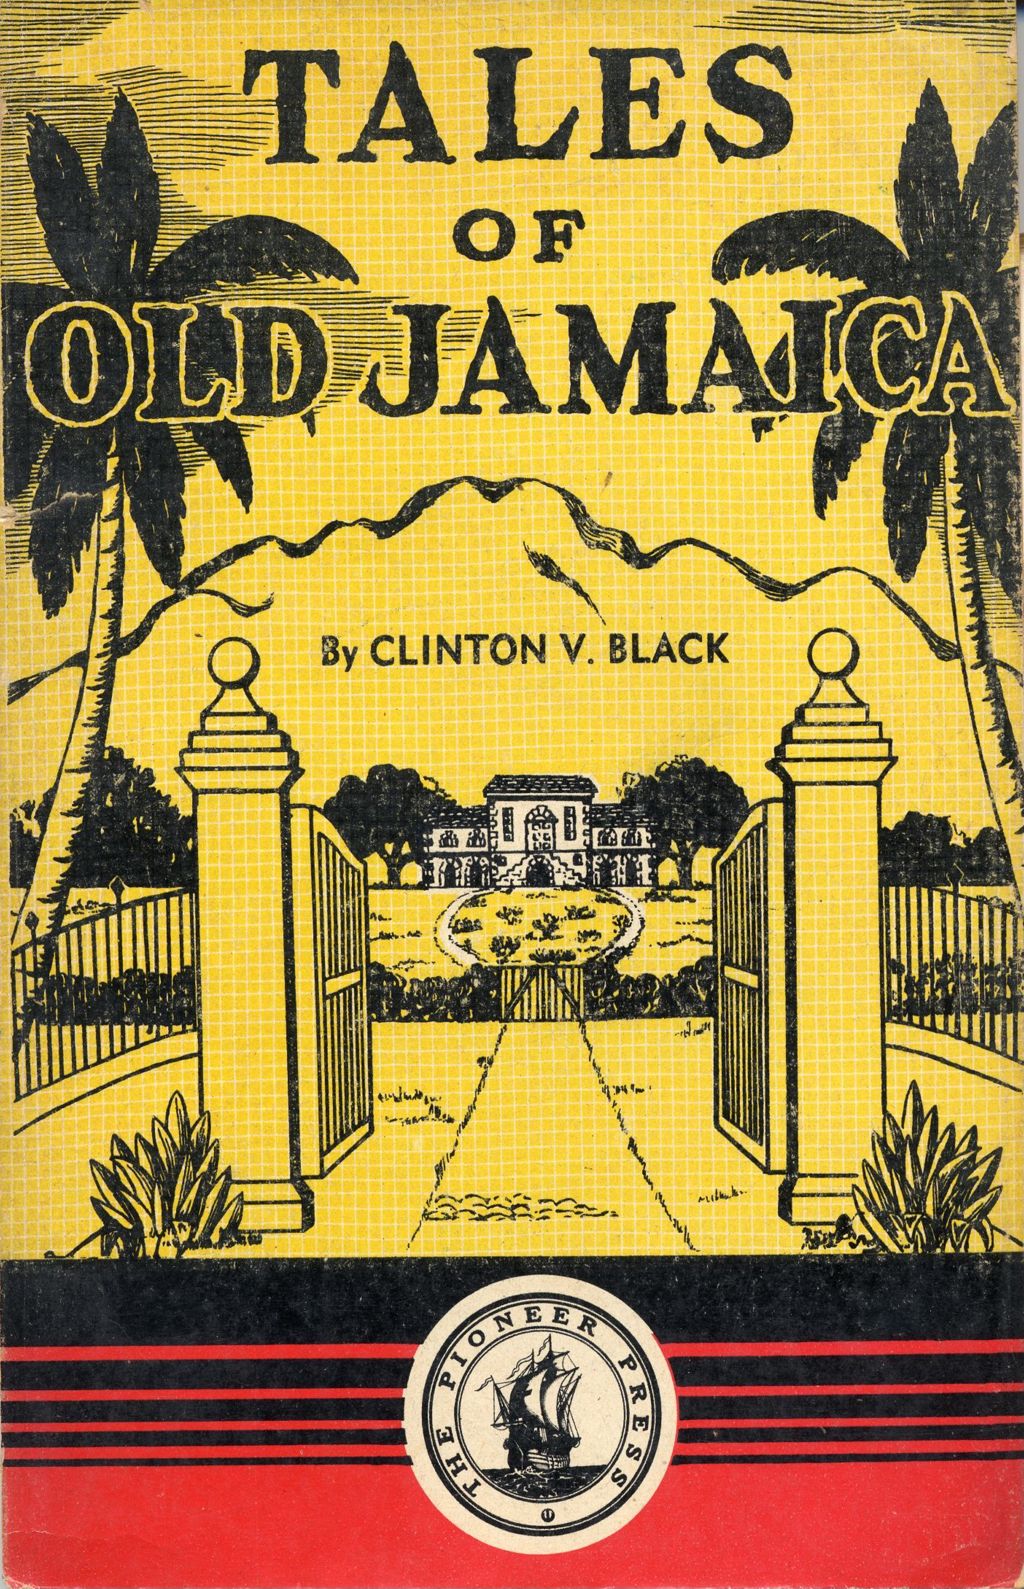 Miniature of Tales of old Jamaica (front cover)